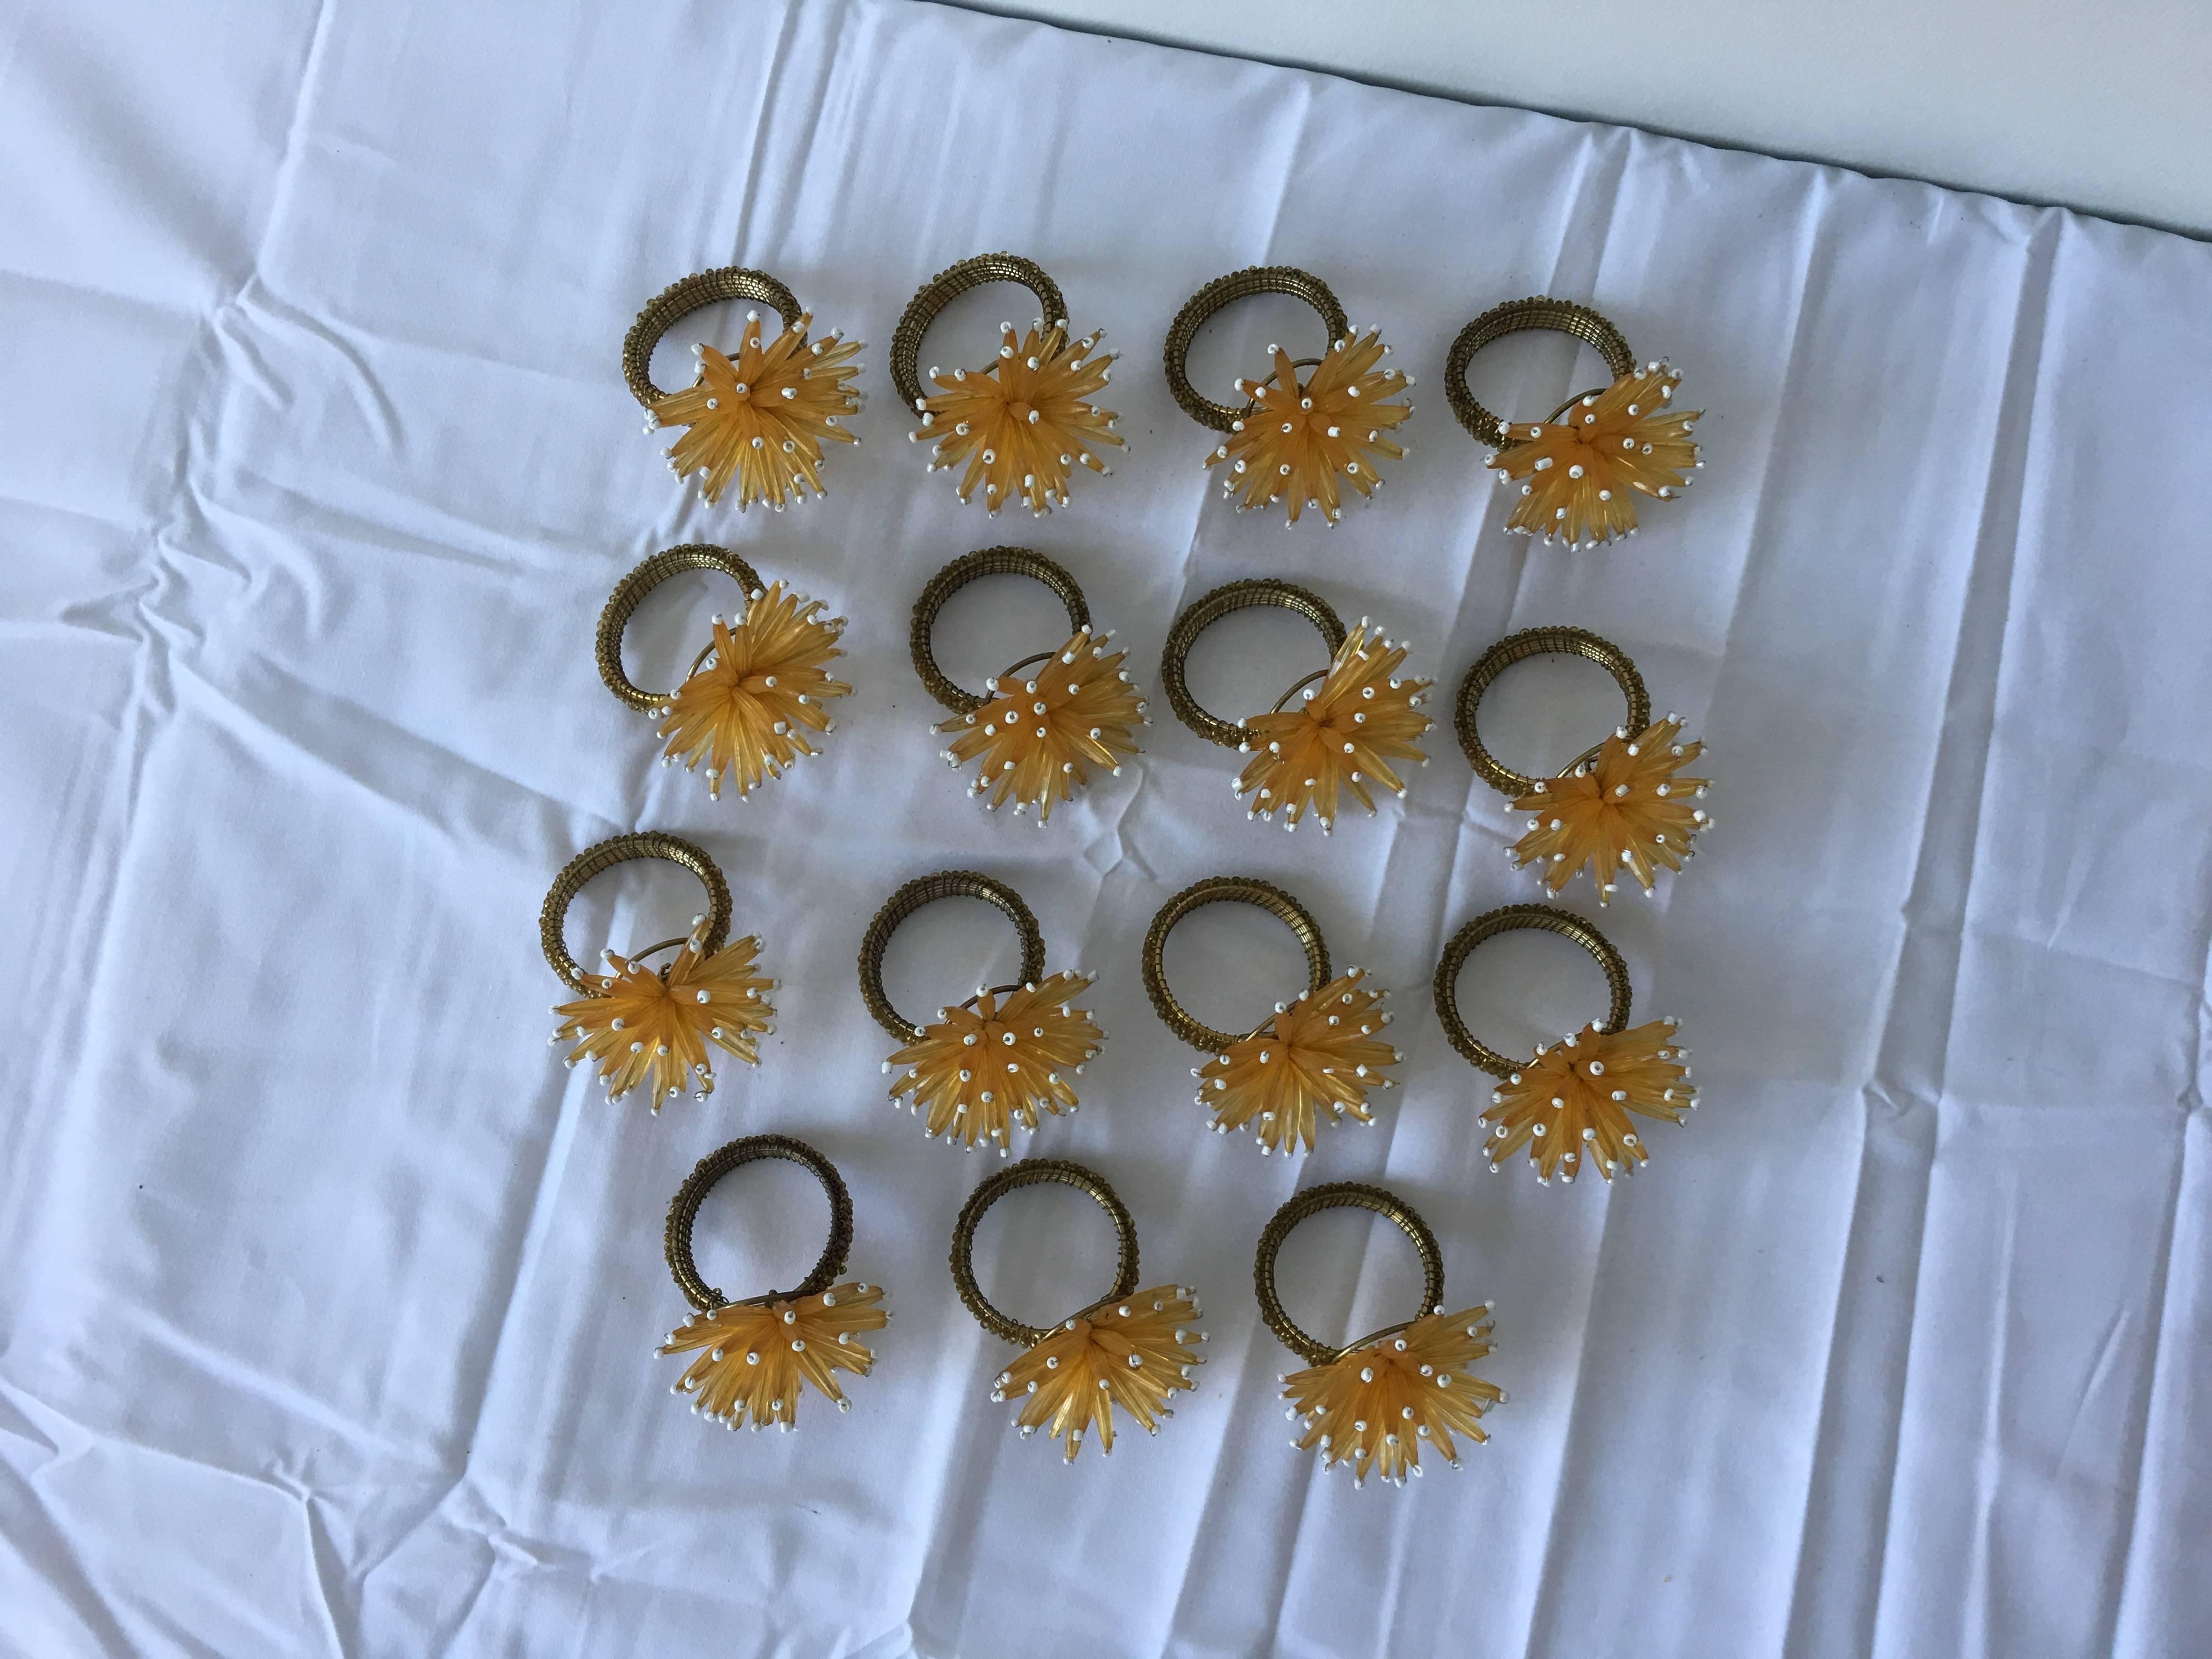 An immaculate set of 16, 1980s yellow and gold beaded starburst napkin rings. Modern with a sophisticated twist of glam!